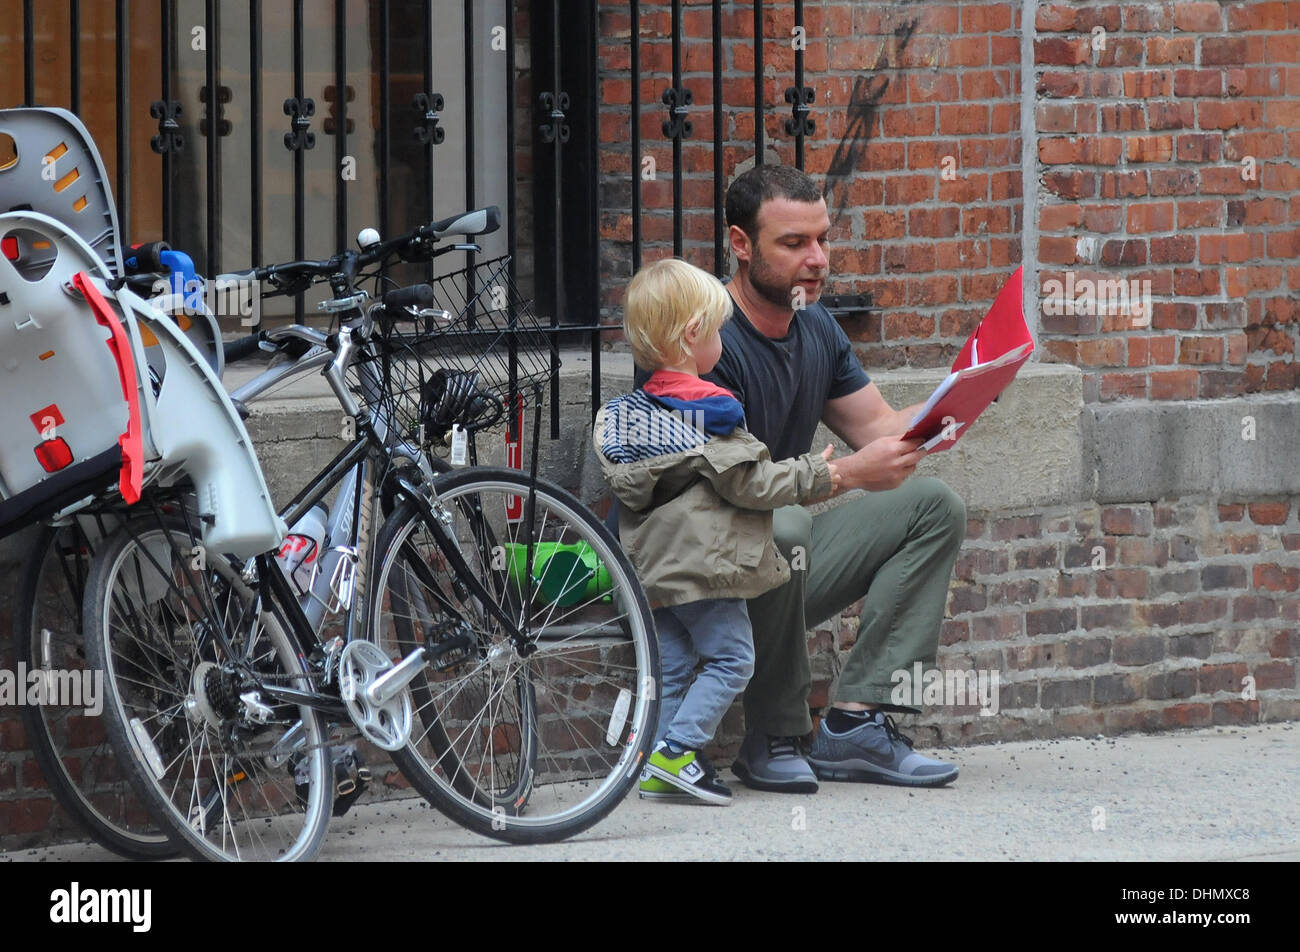 Liev Schreiber reads to his son outside his school in Manhattan New York City, USA - 04.05.12 Stock Photo